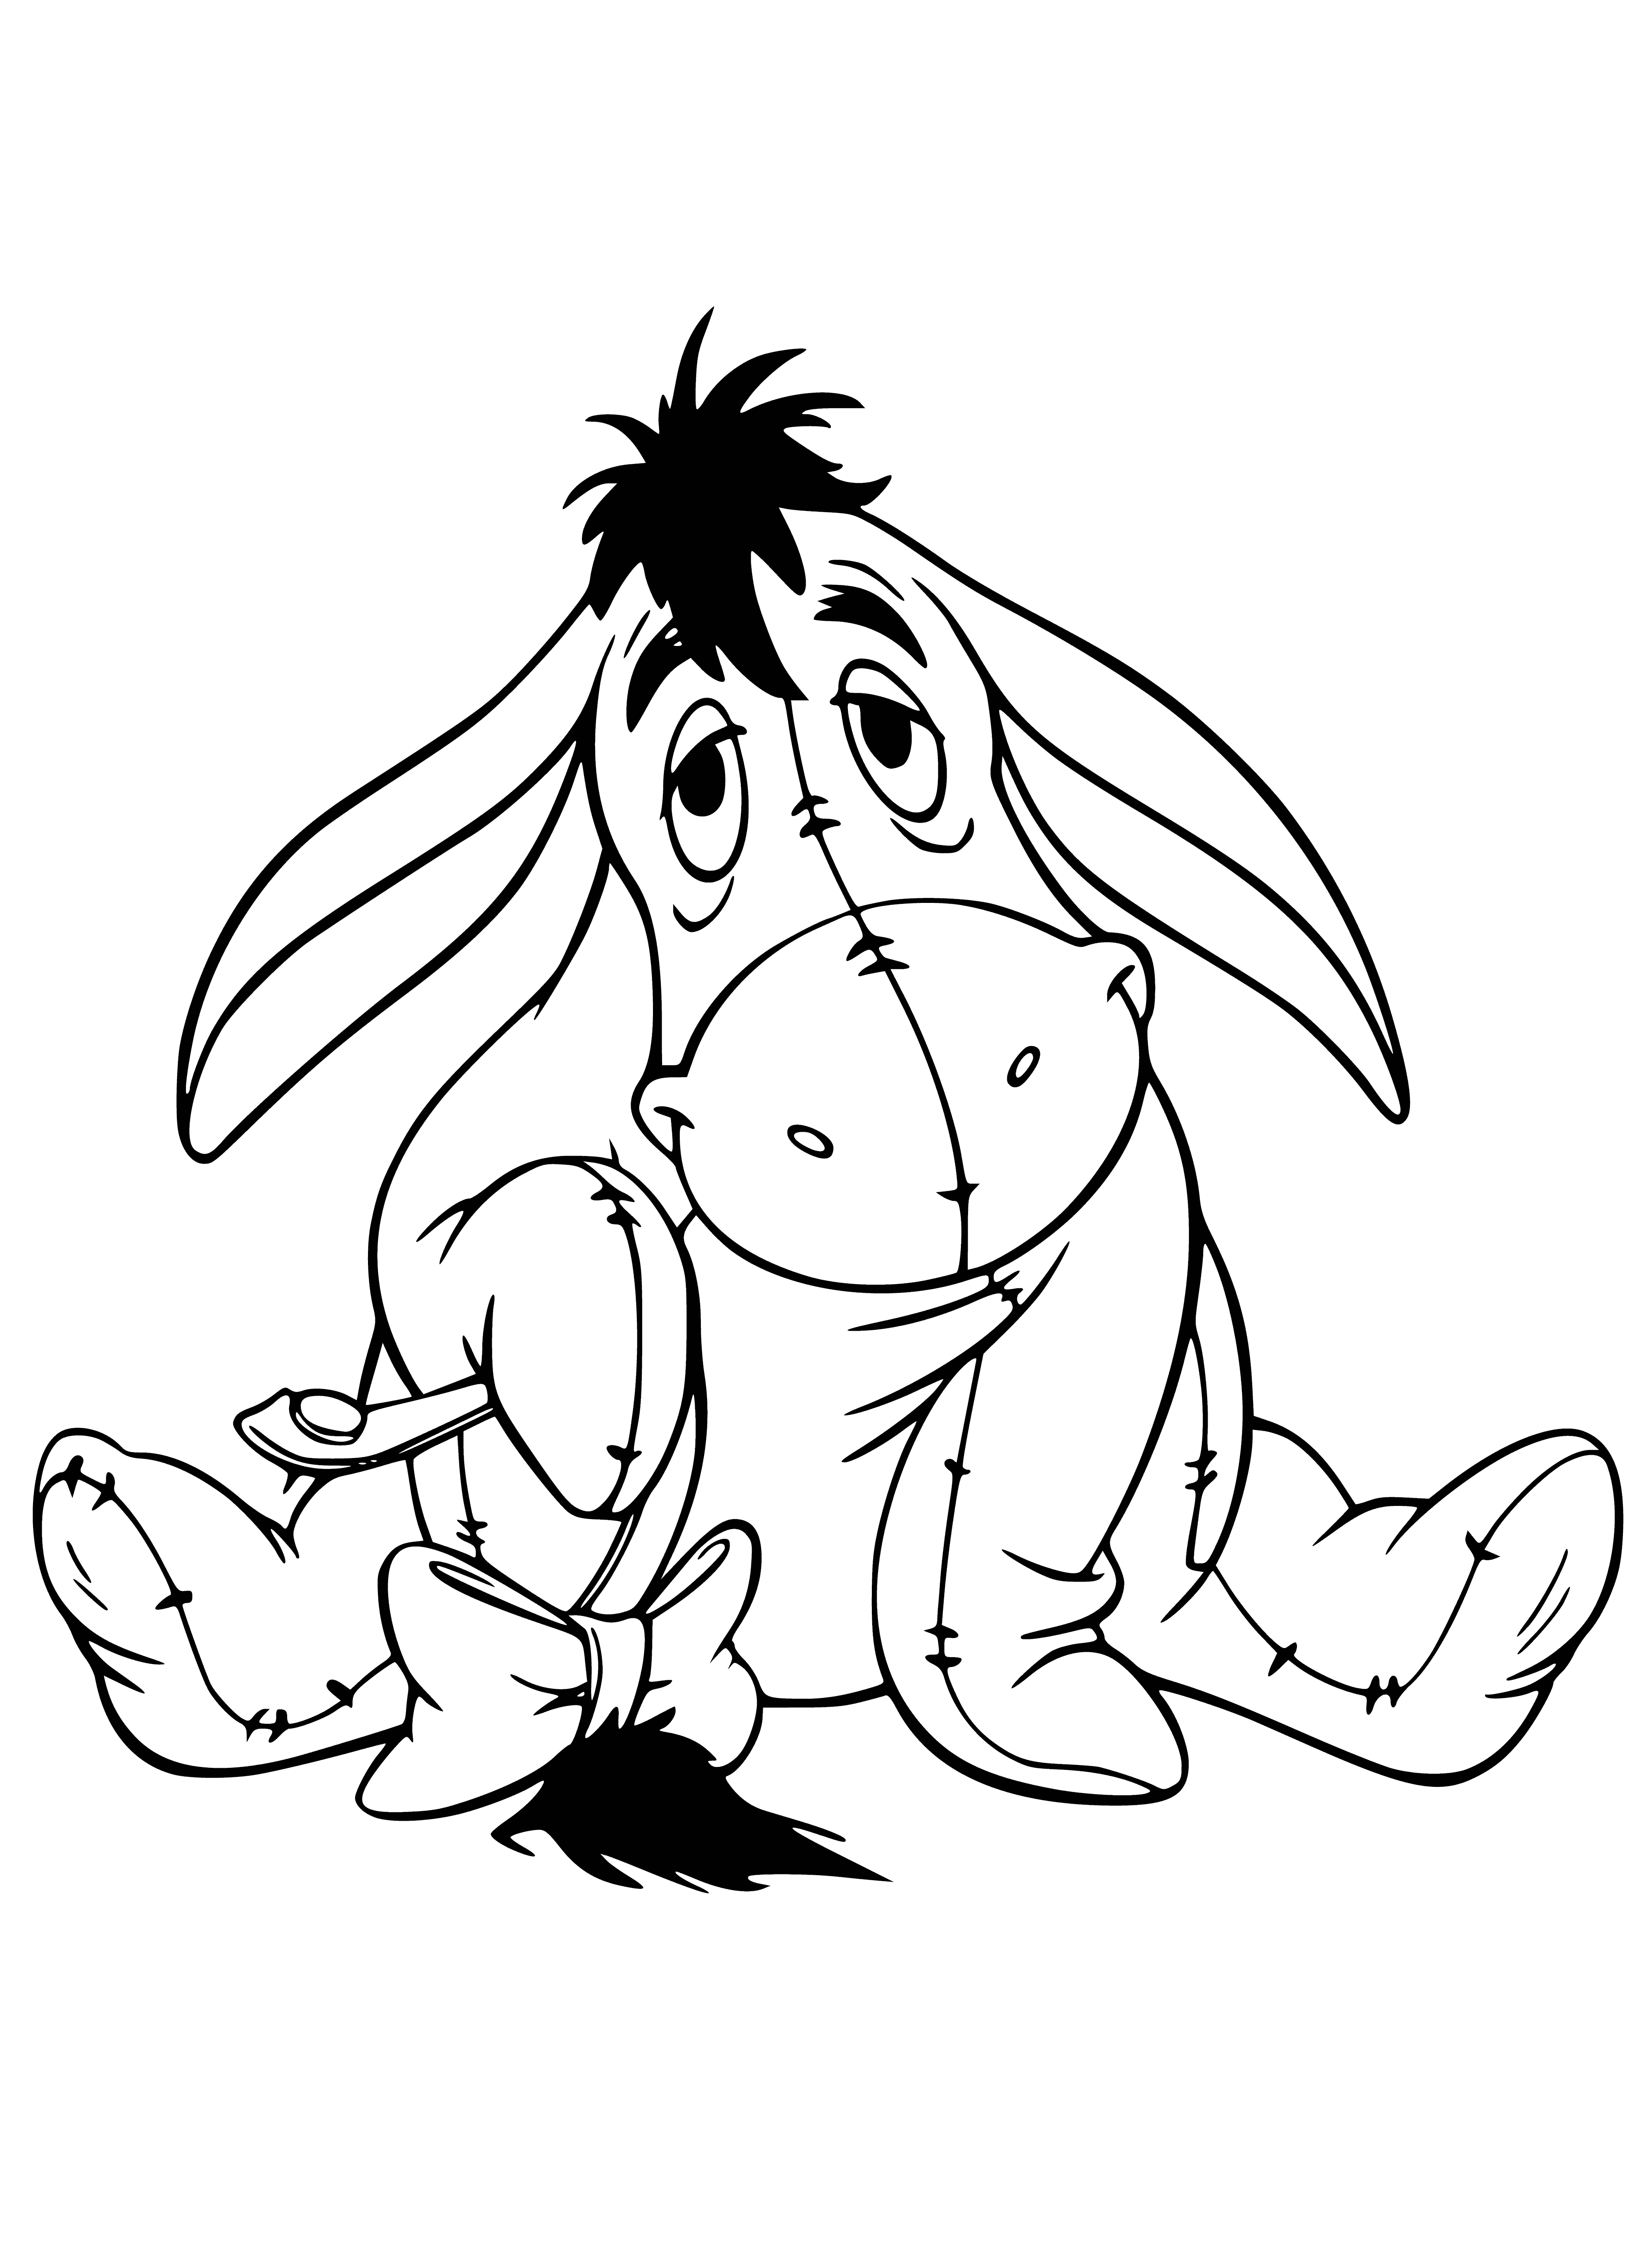 Eeyore and tail coloring page